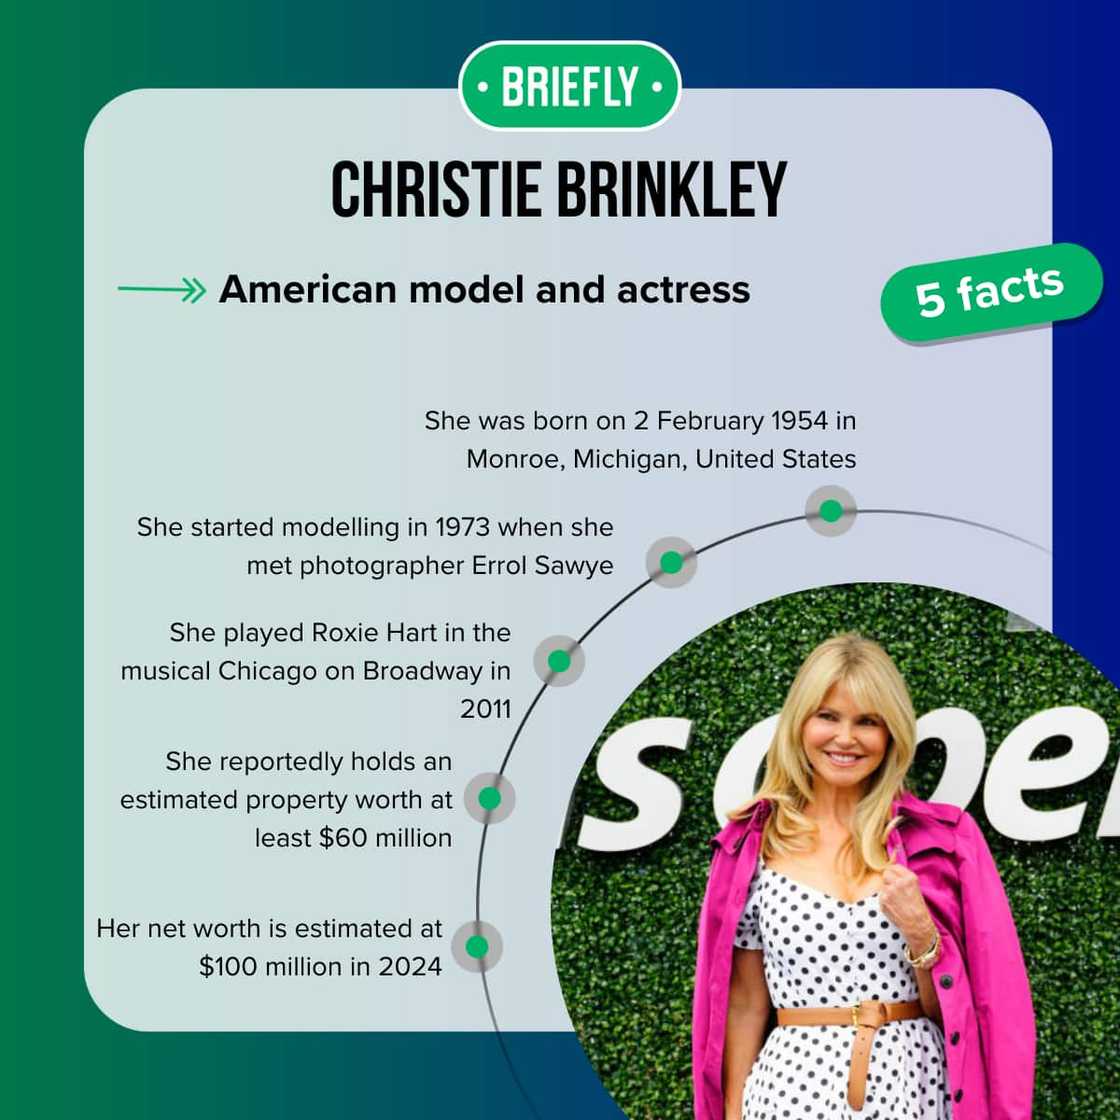 Christie Brinkley’s facts